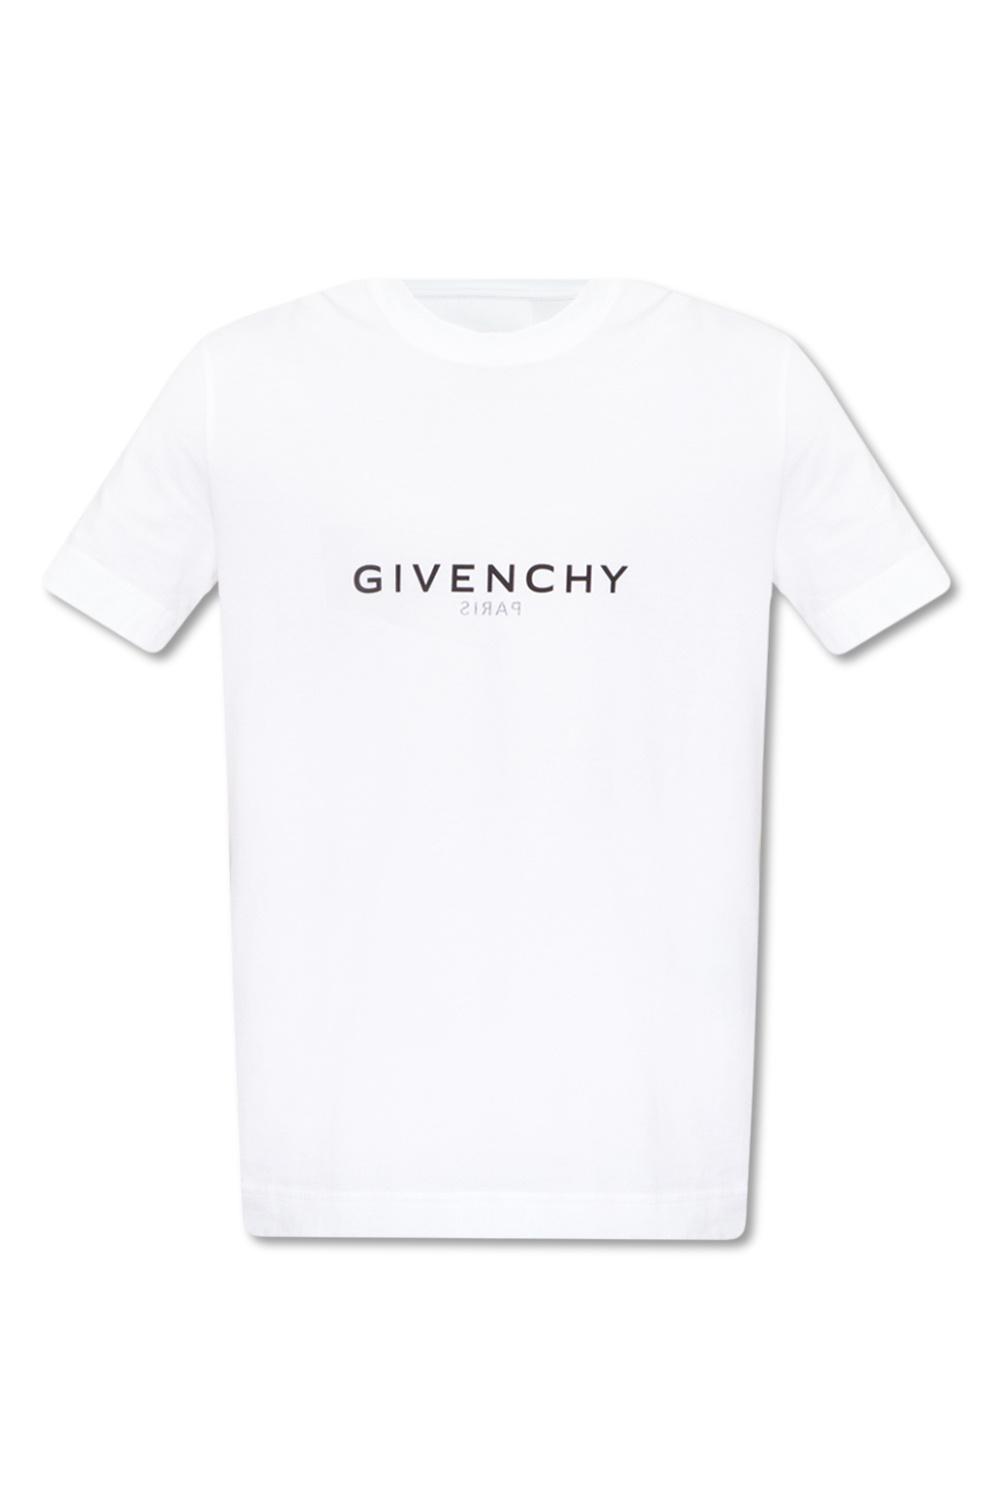 Givenchy Cotton Logo T-shirt in White for Men | Lyst